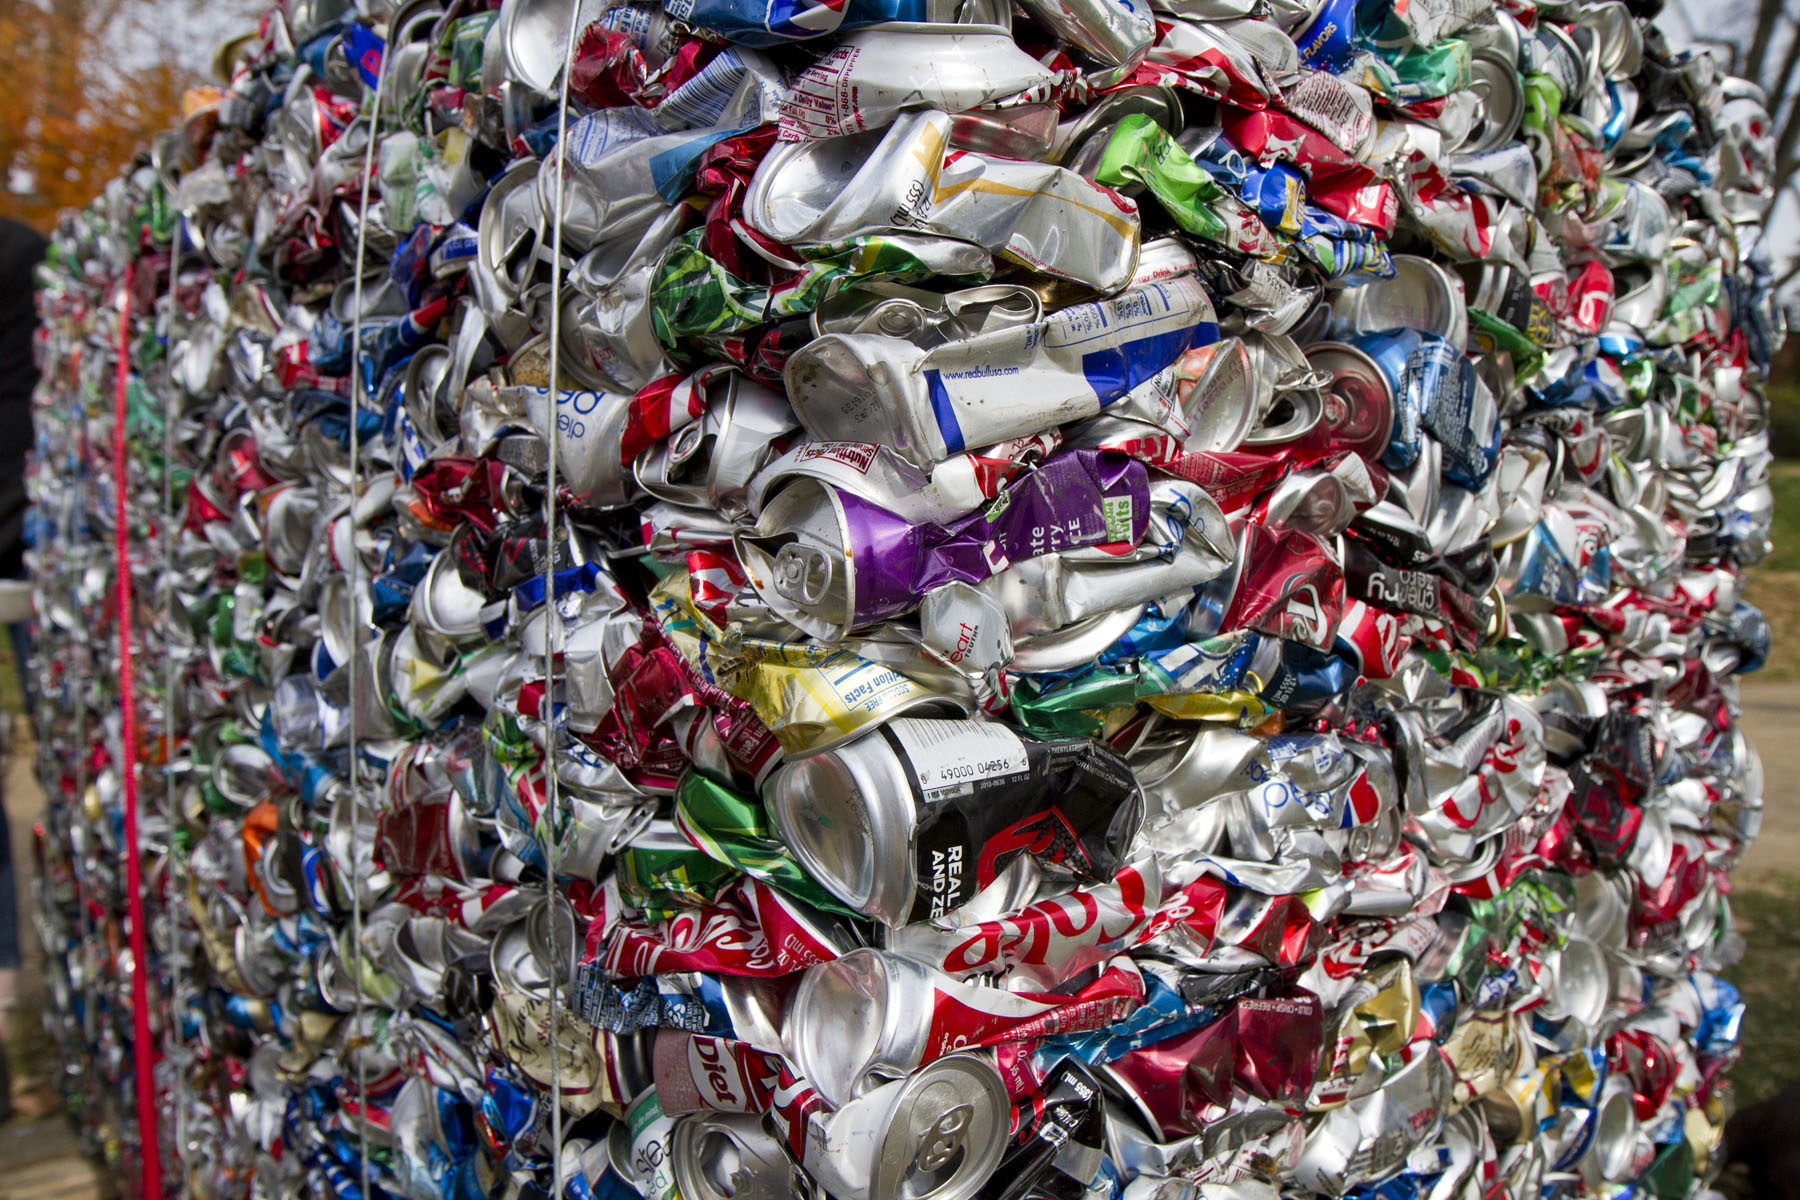 Thousands of crushed aluminum cans tied up in cubes from a UVA game day